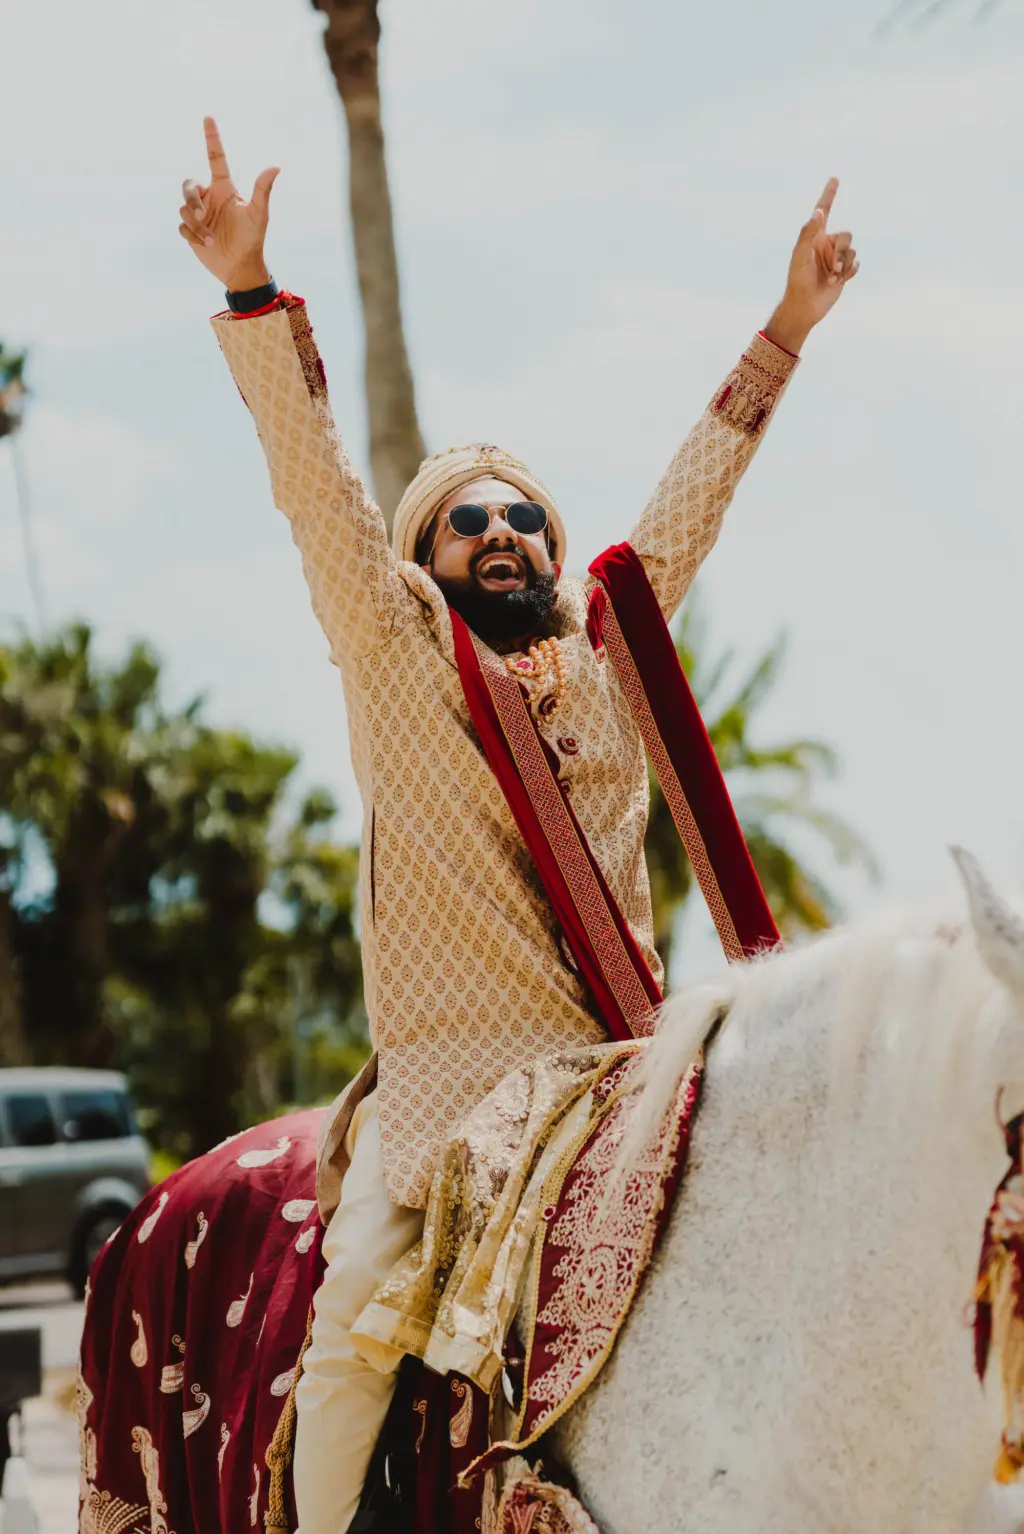 Groom's Red and Gold Sherwani with Stole Riding Horse for Indian Baraat Wedding Portrait | Tampa Photographer and Videographer Mars and The Moon Films